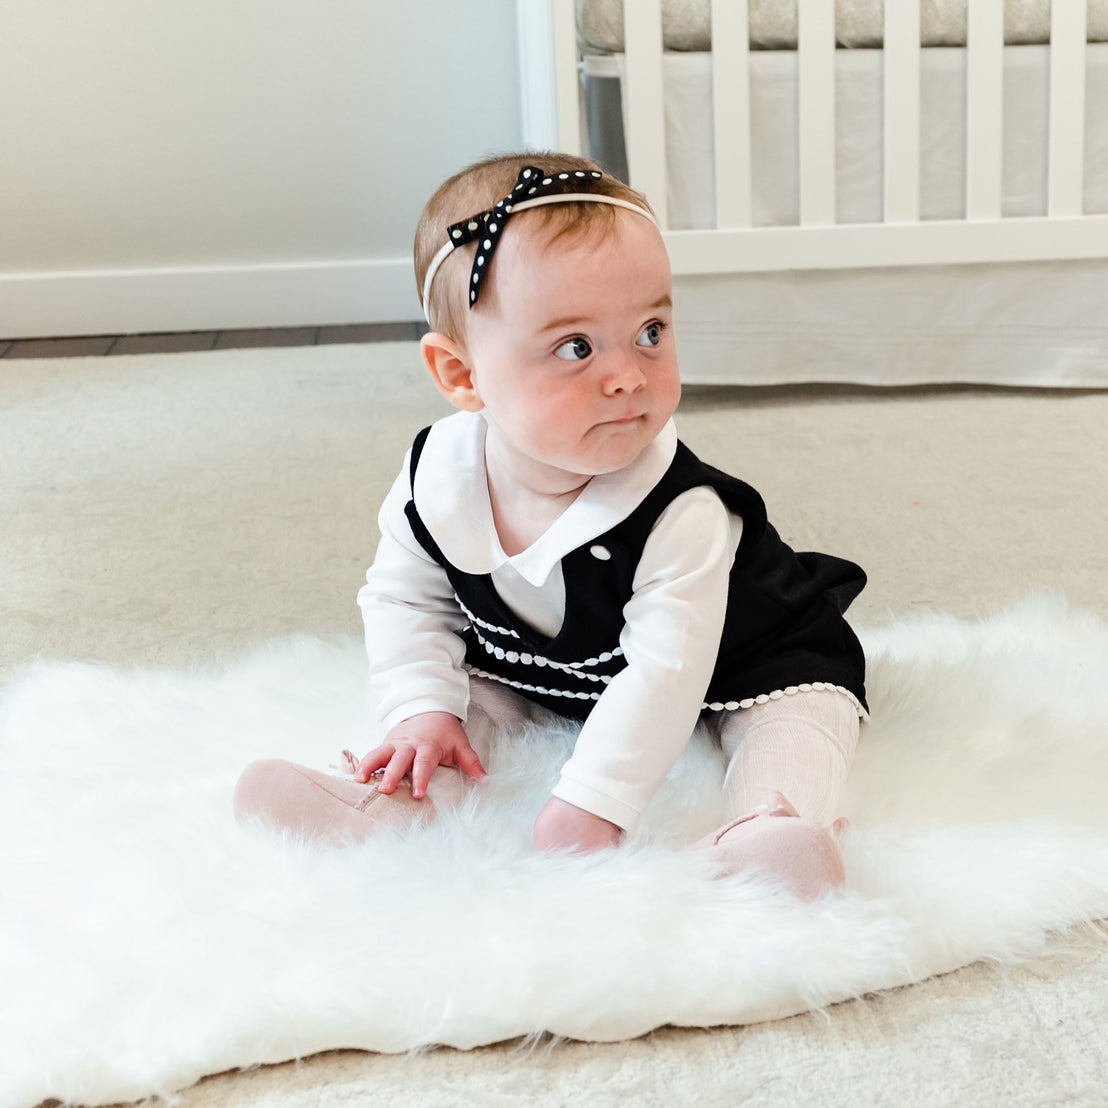 A baby girl in a stylish black and white dress and a headband sits on a soft rug, looking to the side with a focused expression, in a room with June Suede Tie Mary Janes in the background.